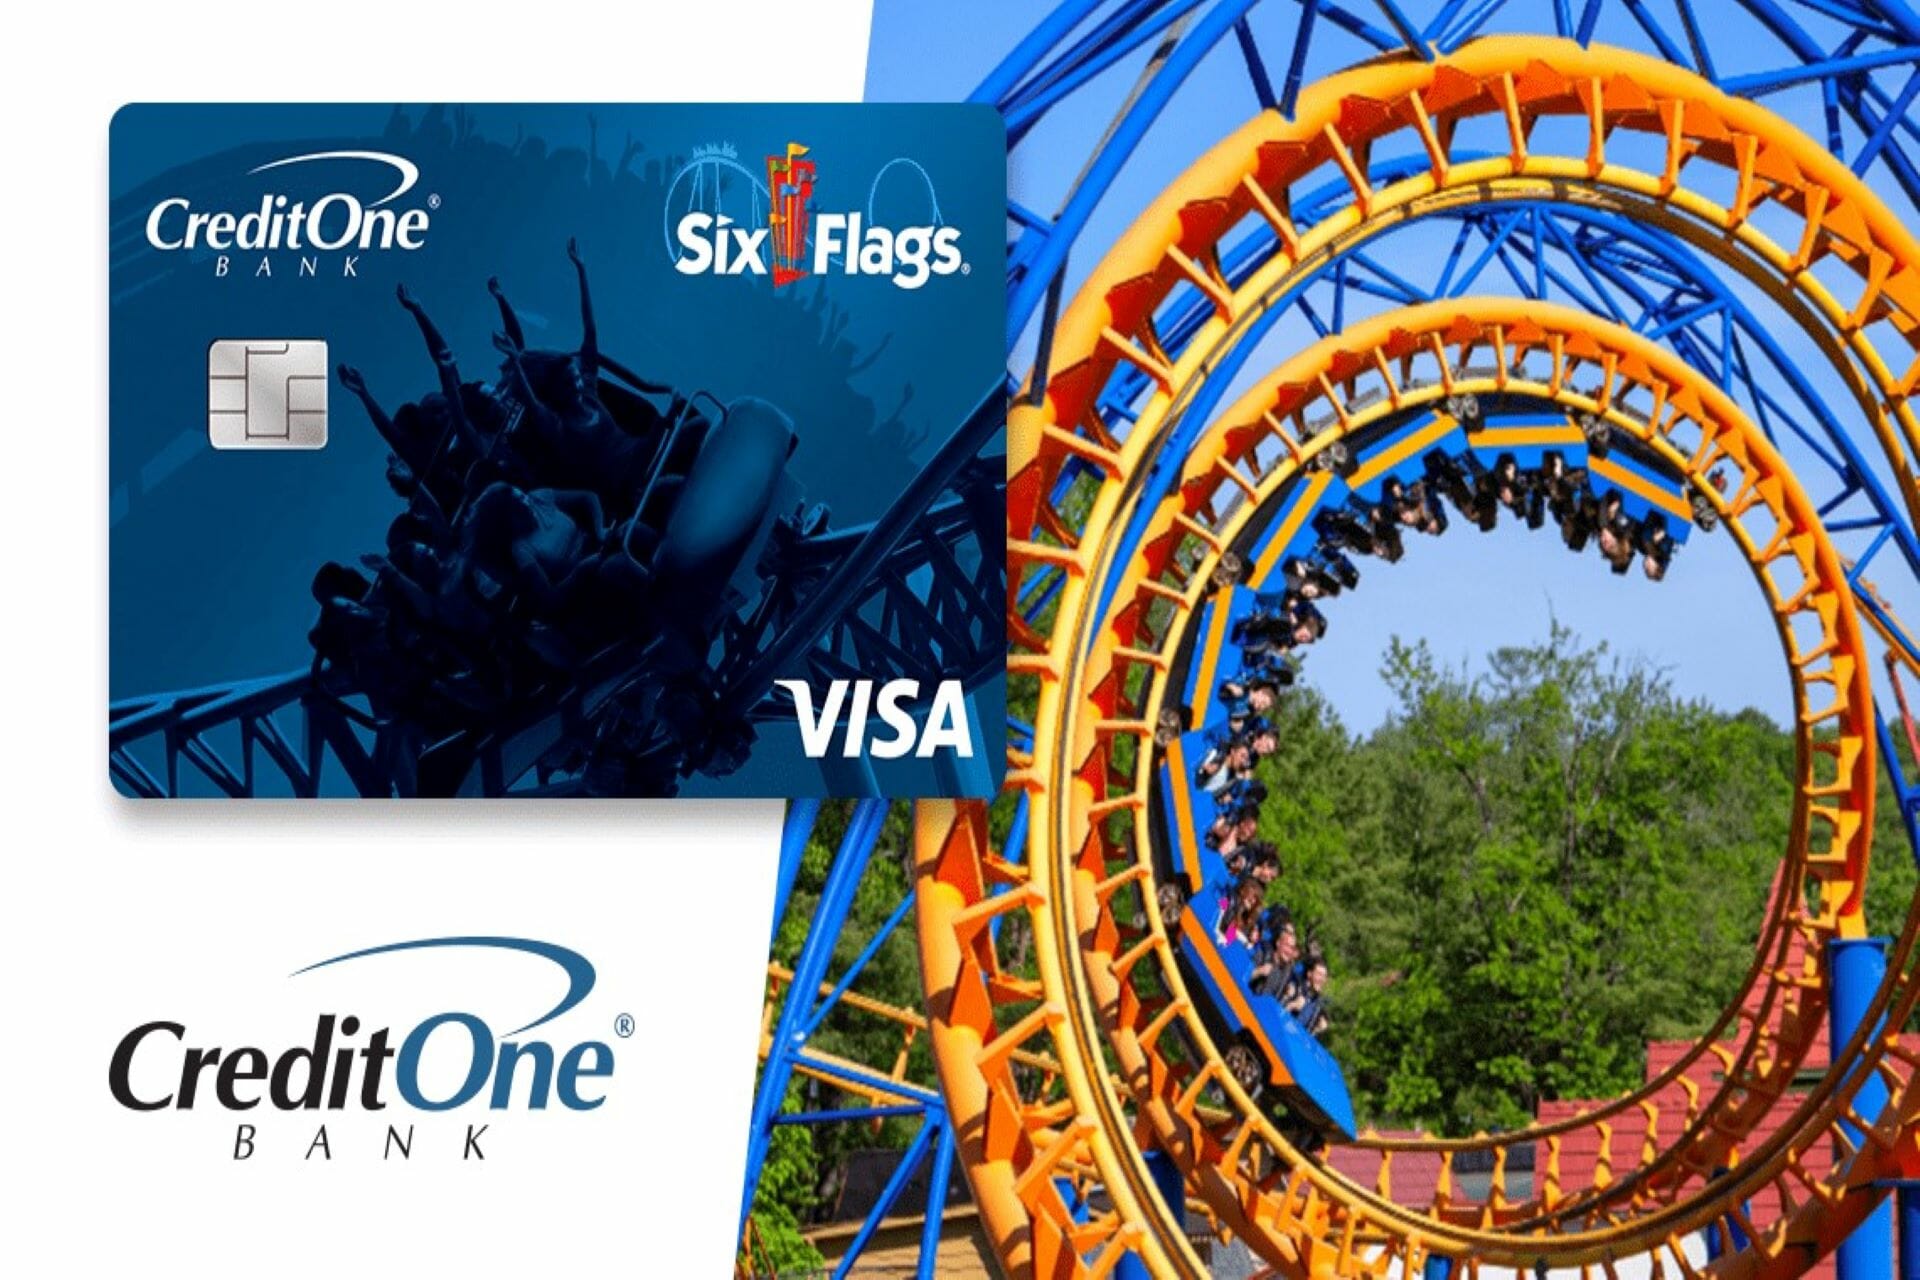 Credit One Bank Launches New Six Flags Visa